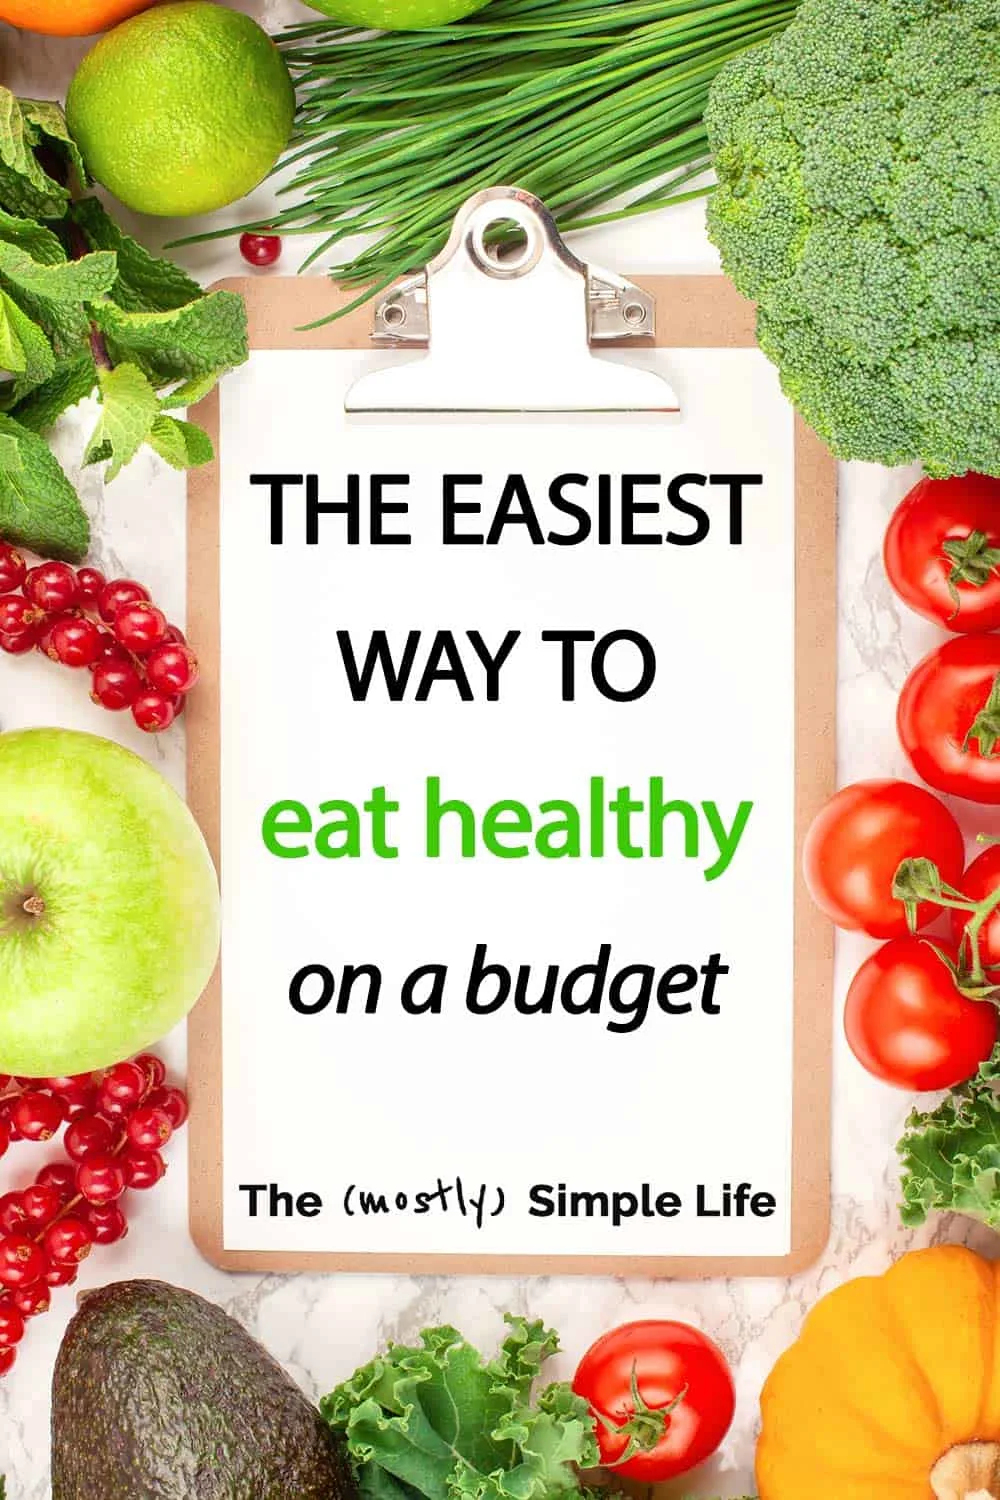 The Easiest Way to Eat Healthy on a Budget